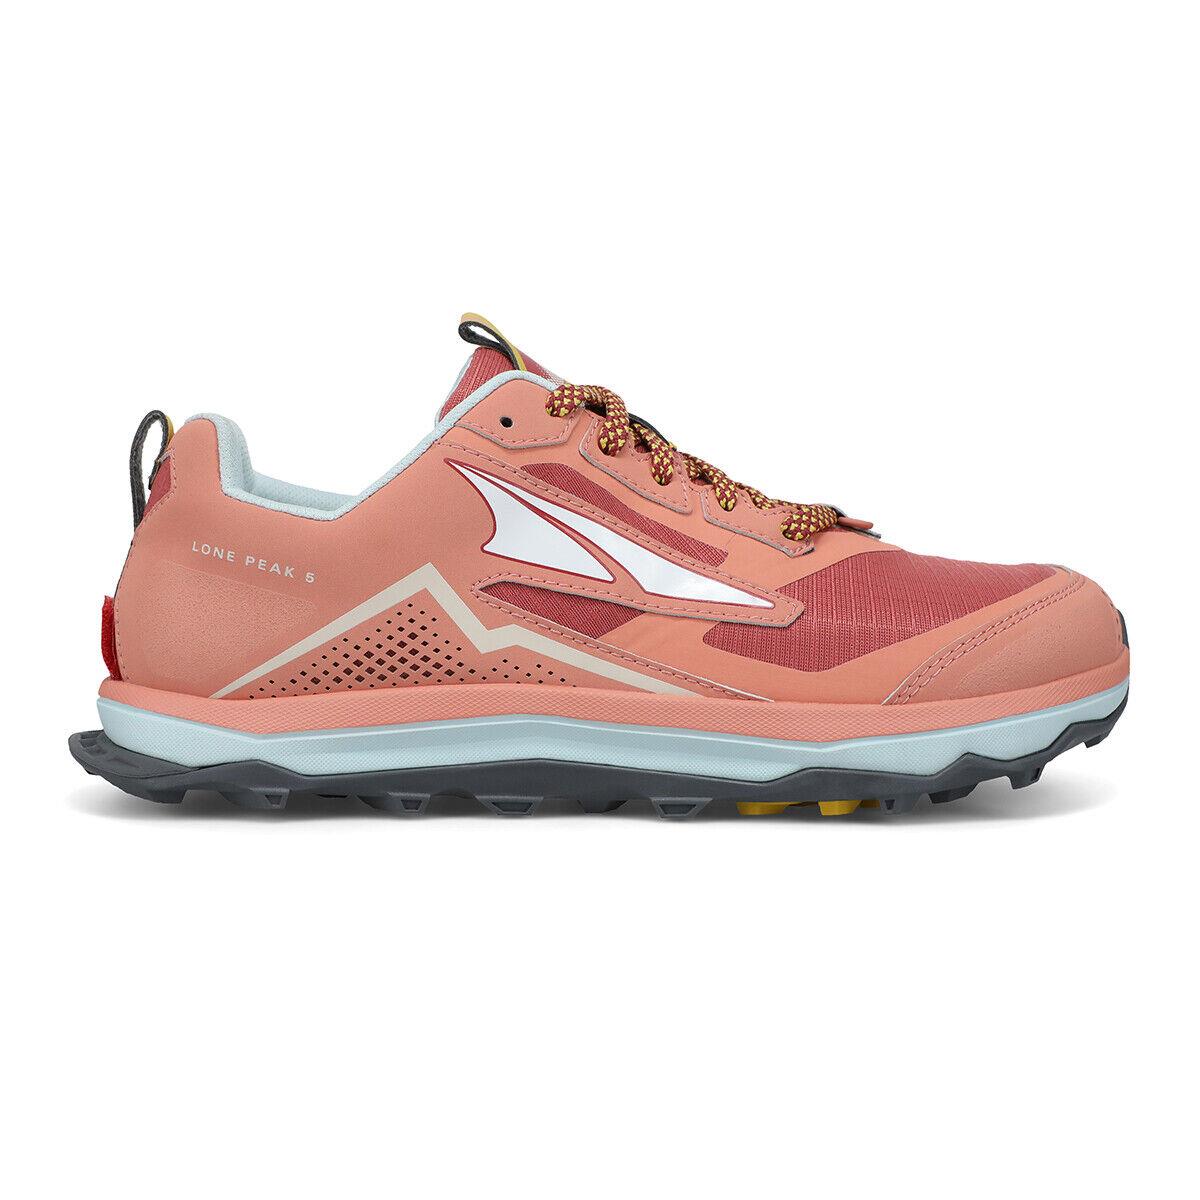 Women`s Altra Lone Peak 5 Rose Coral Hiking Trail Running Shoes Sizes 6-11